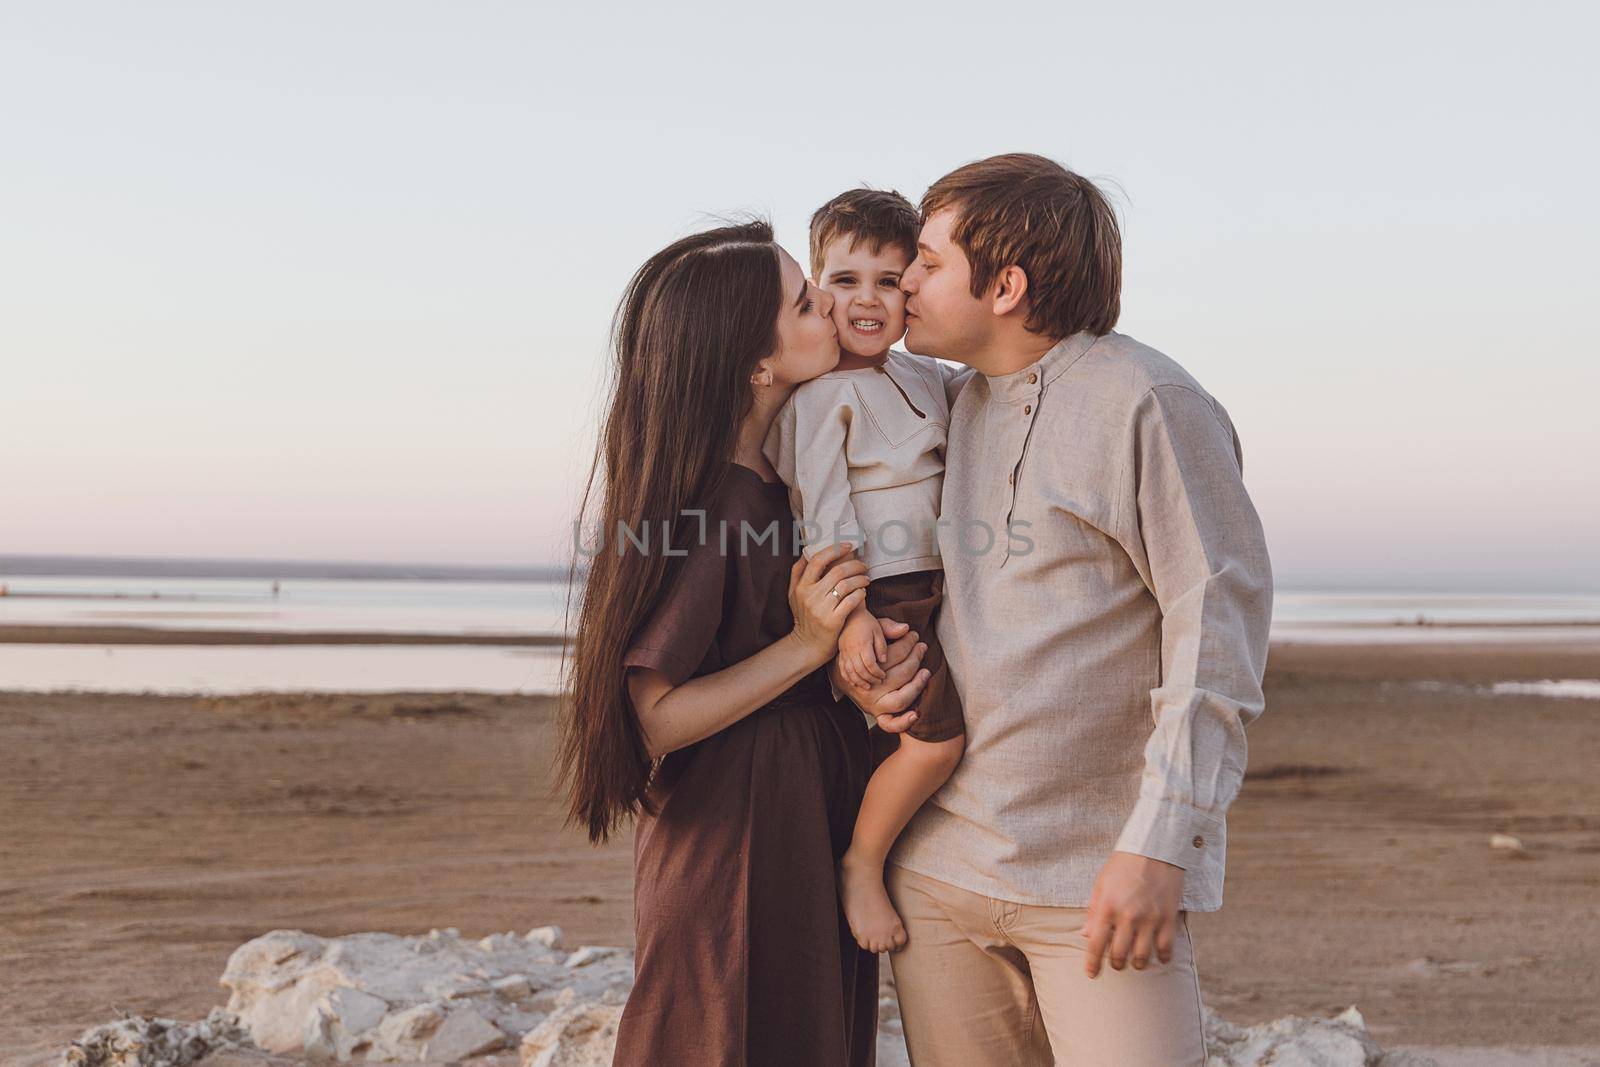 Family look of natural linen clothing on the evening beach. Young family hugs and kisses.